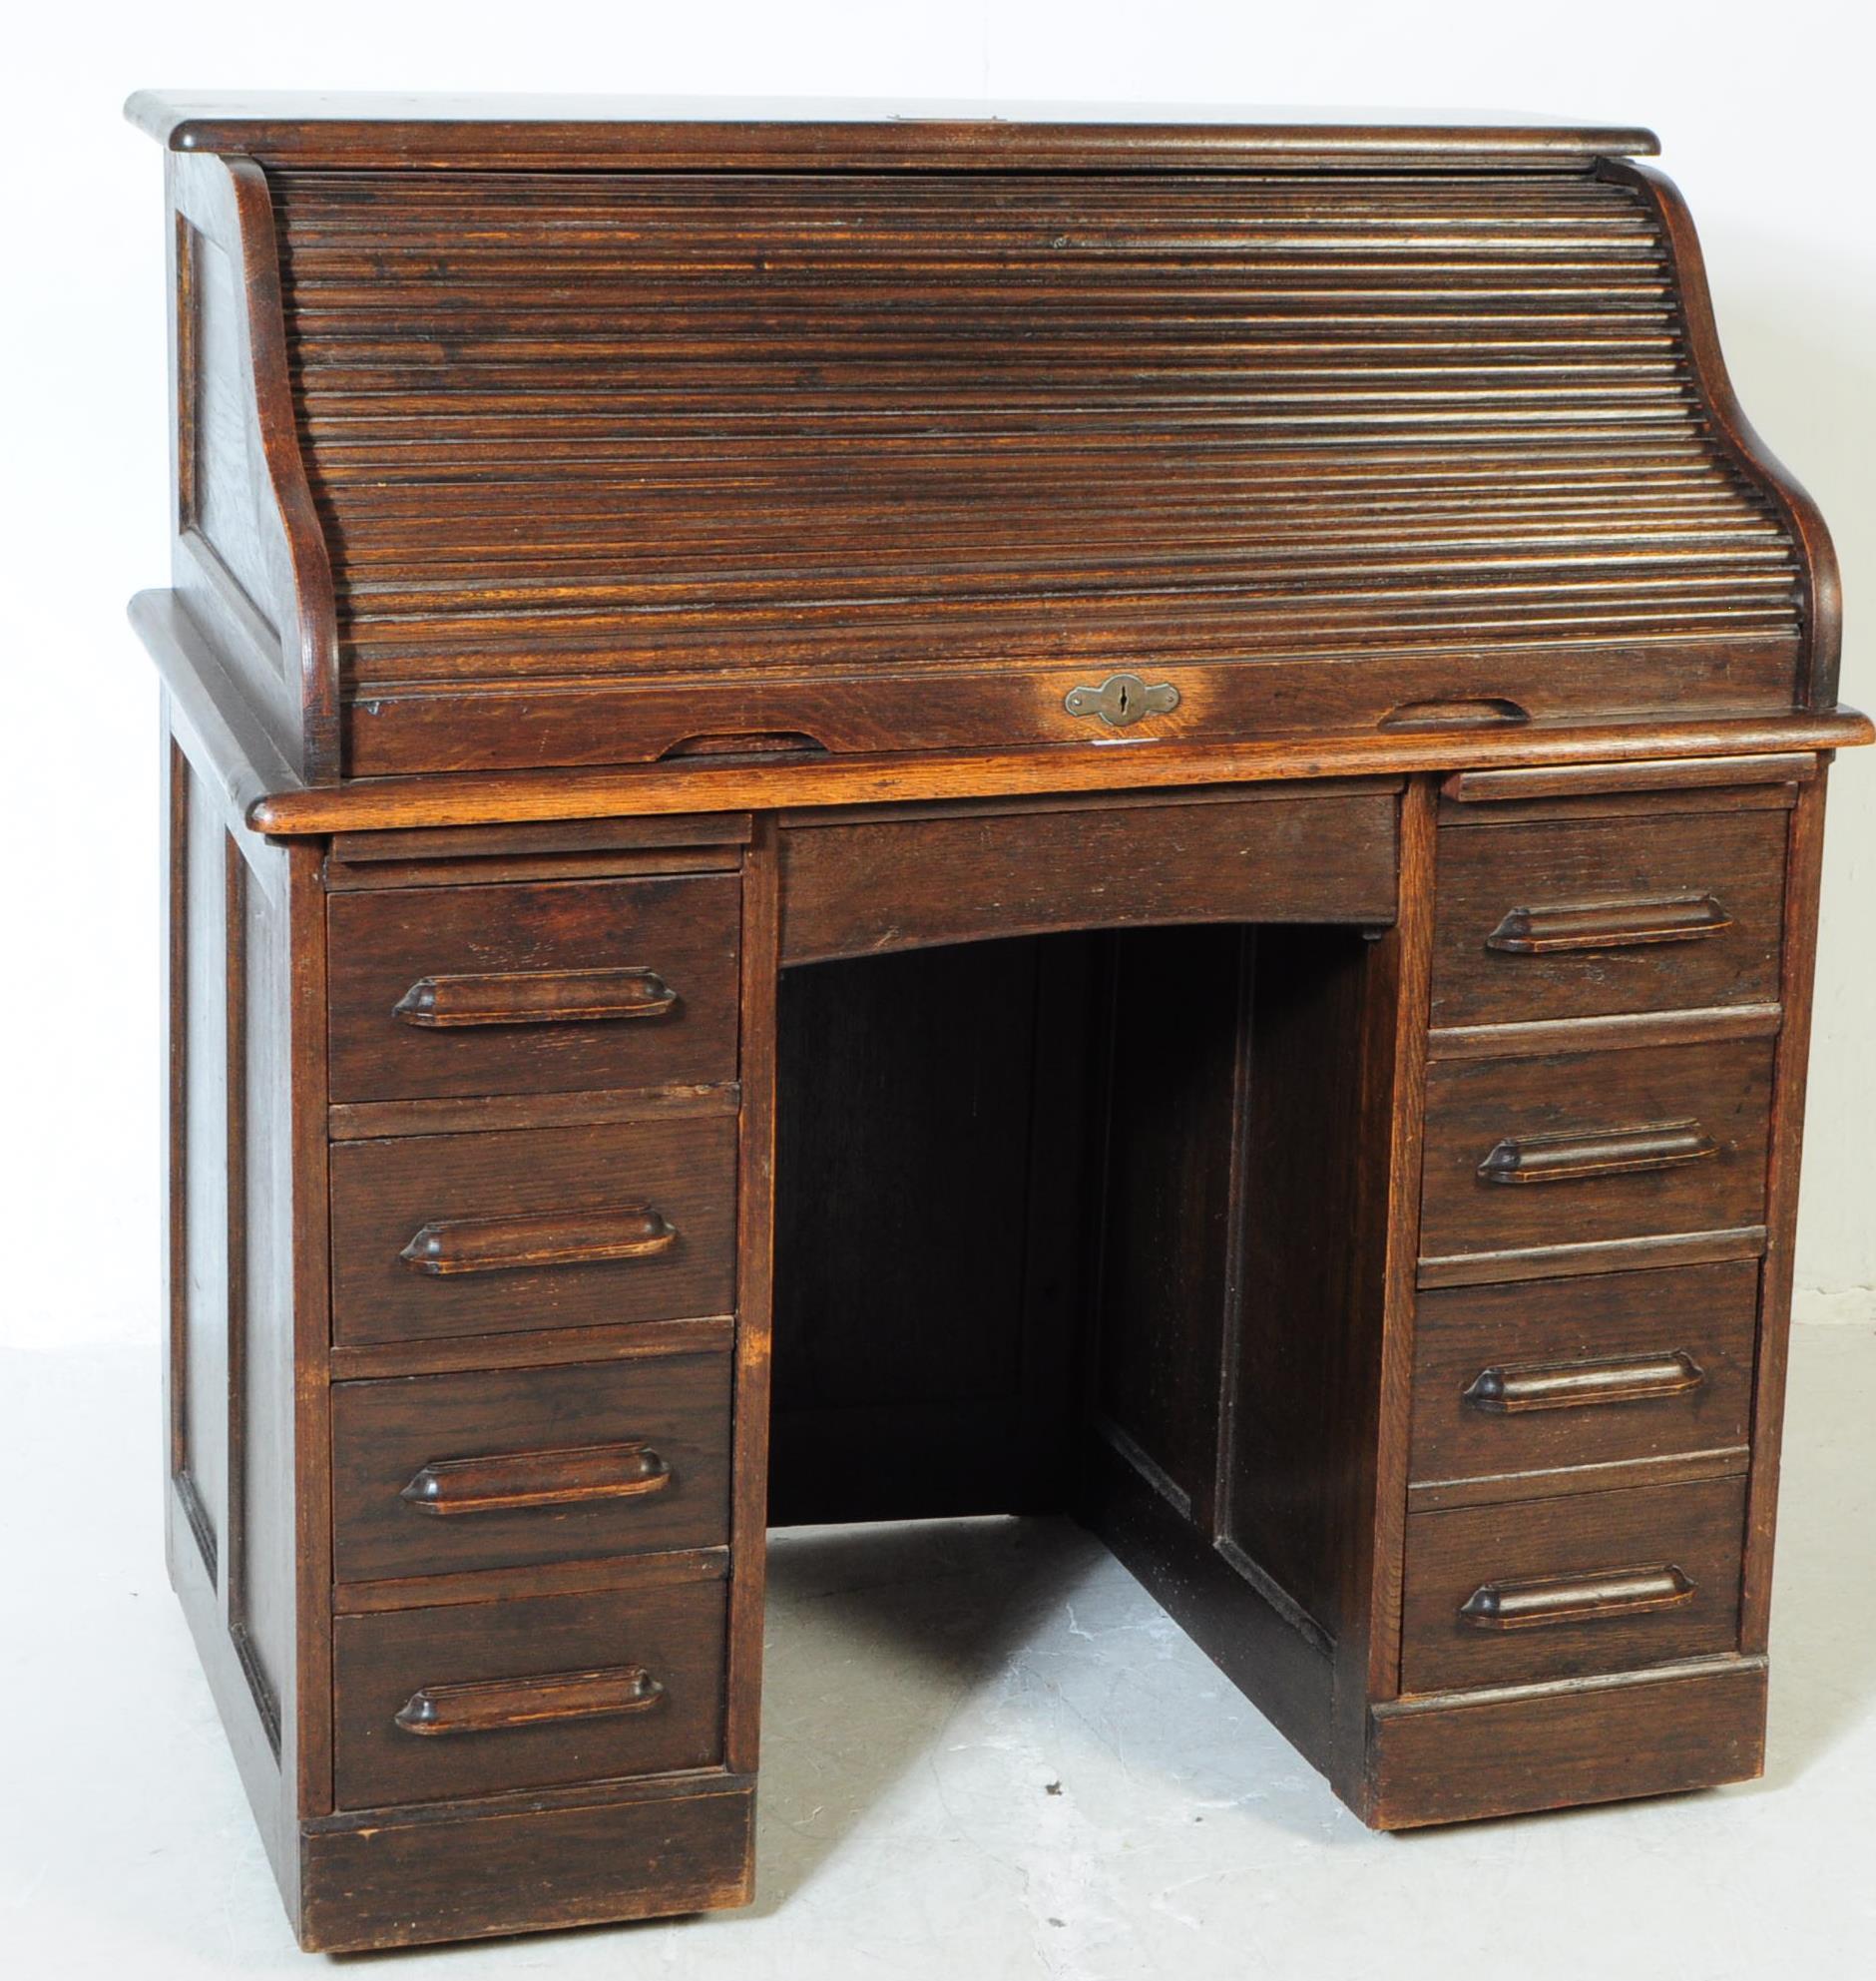 EARLY 20TH CENTURY ART DECO ROLL TOP WRITING DESK